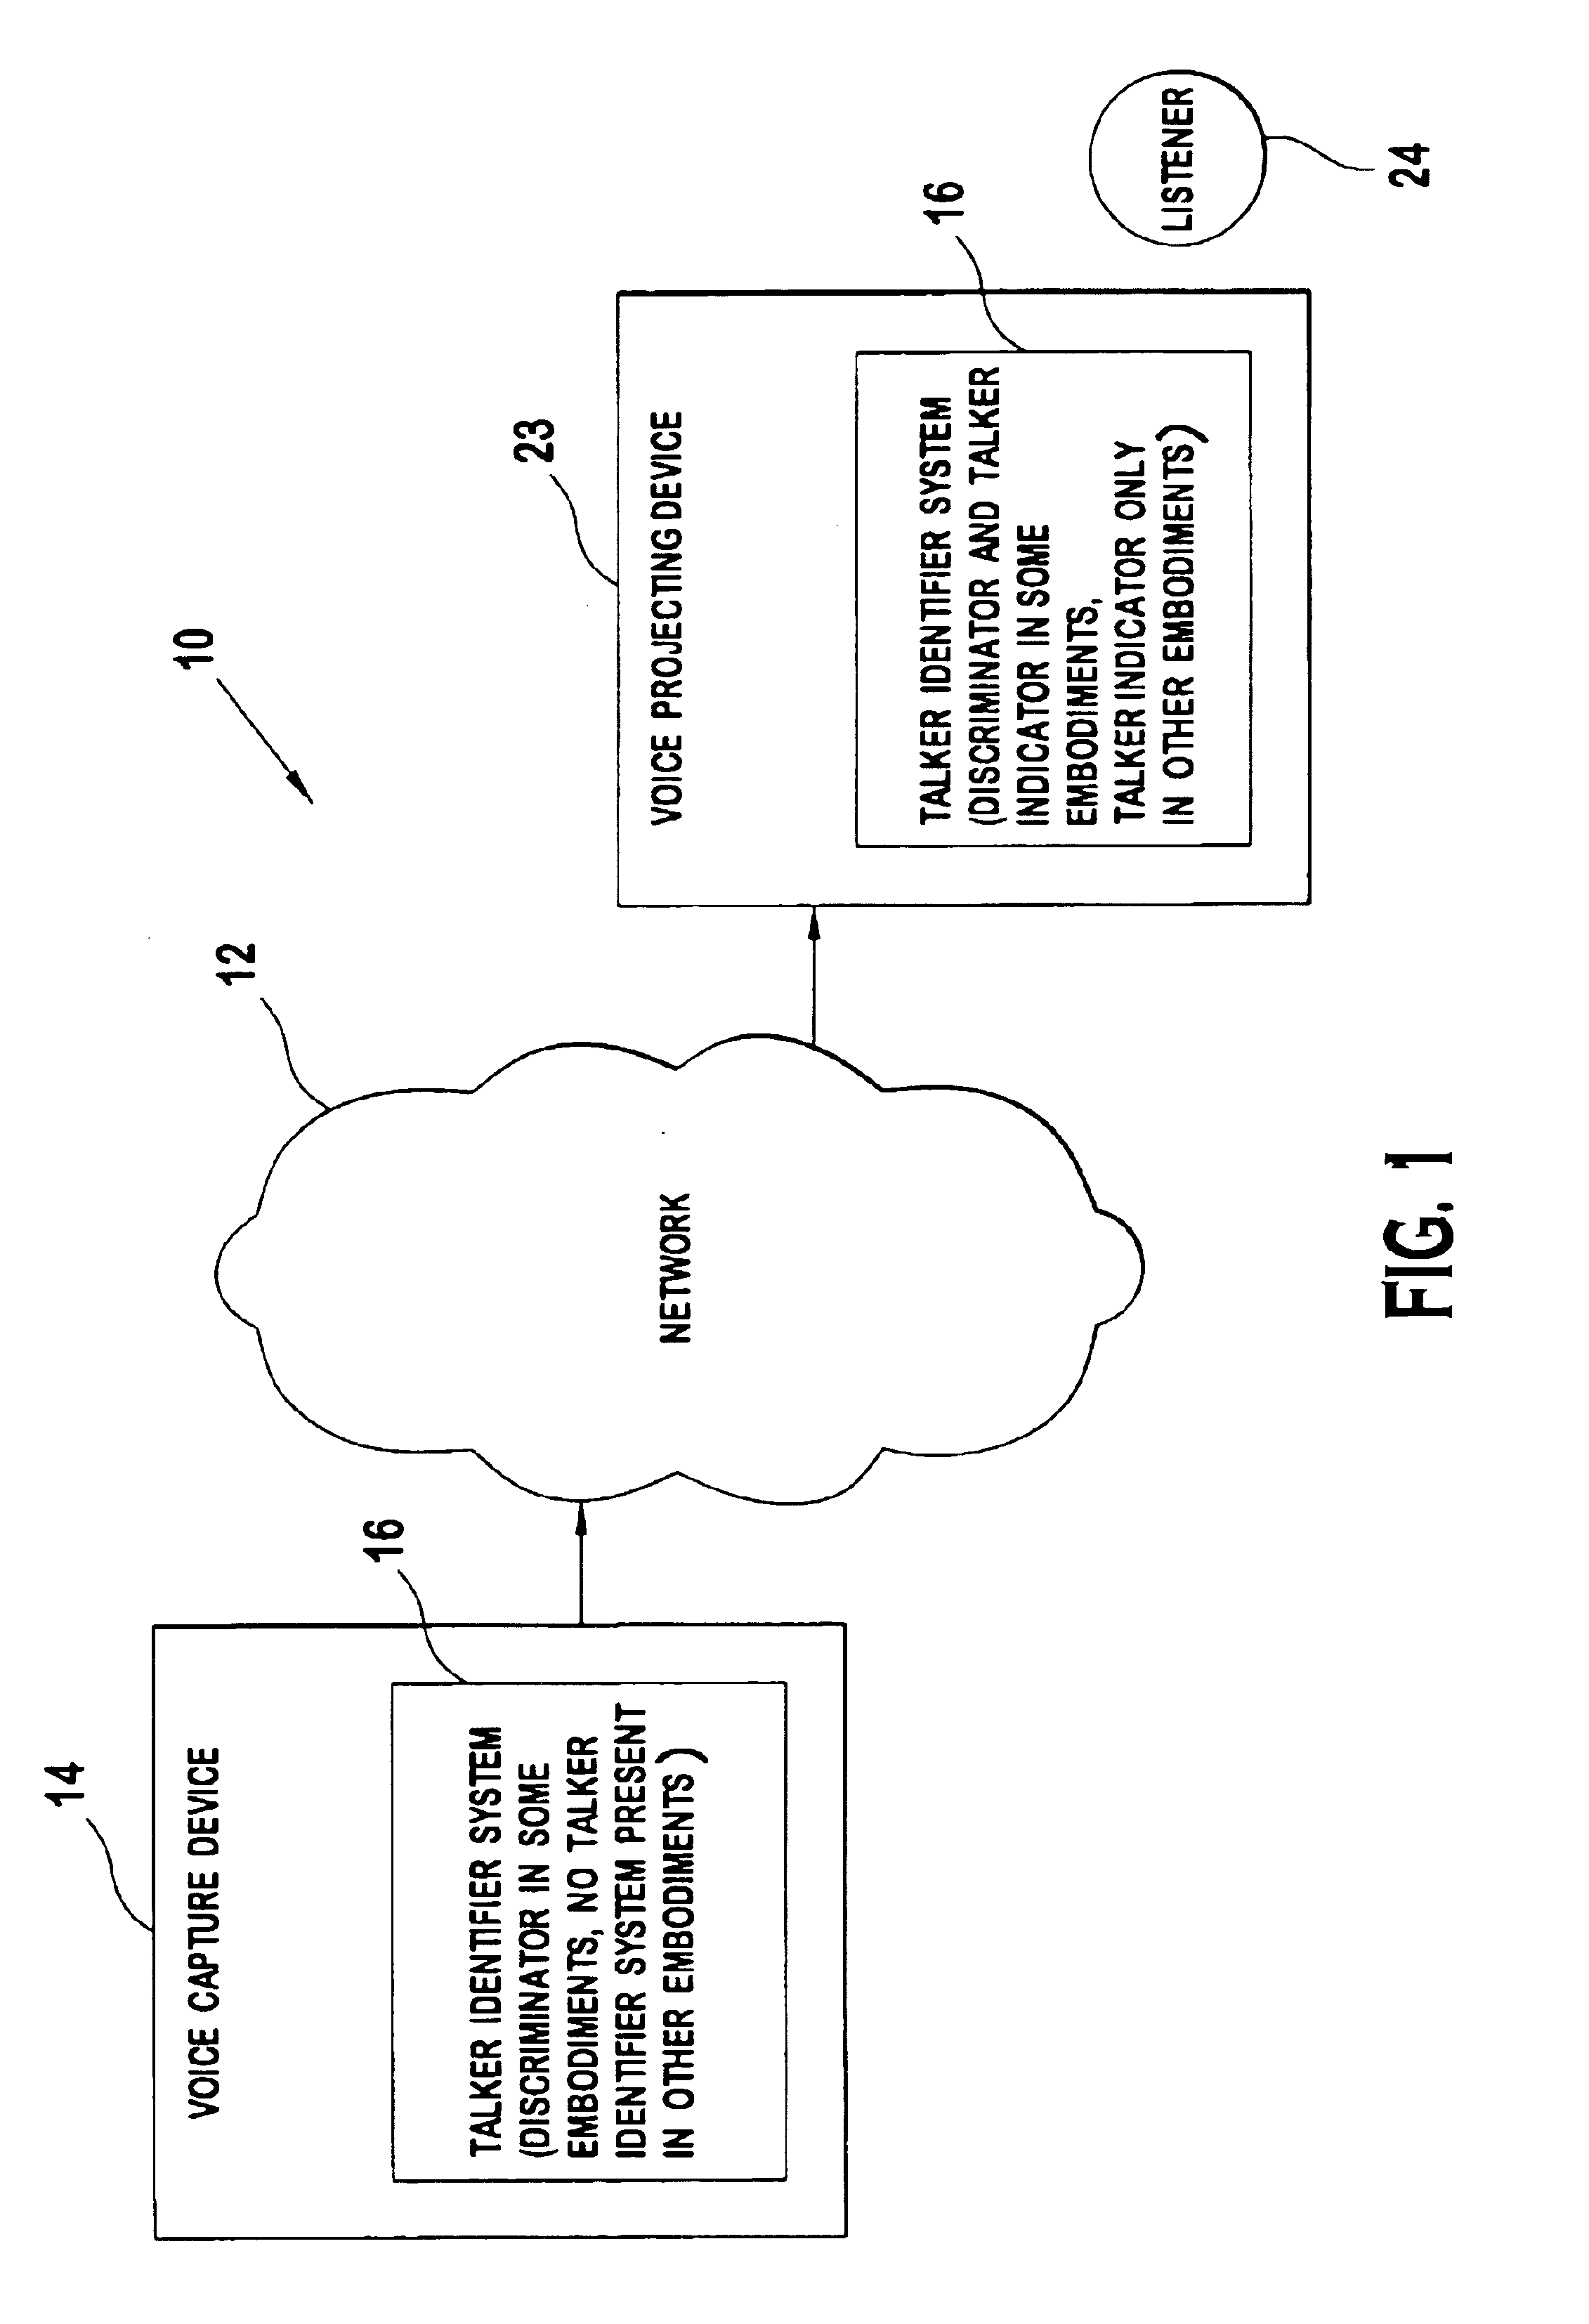 Method and apparatus for improving listener differentiation of talkers during a conference call